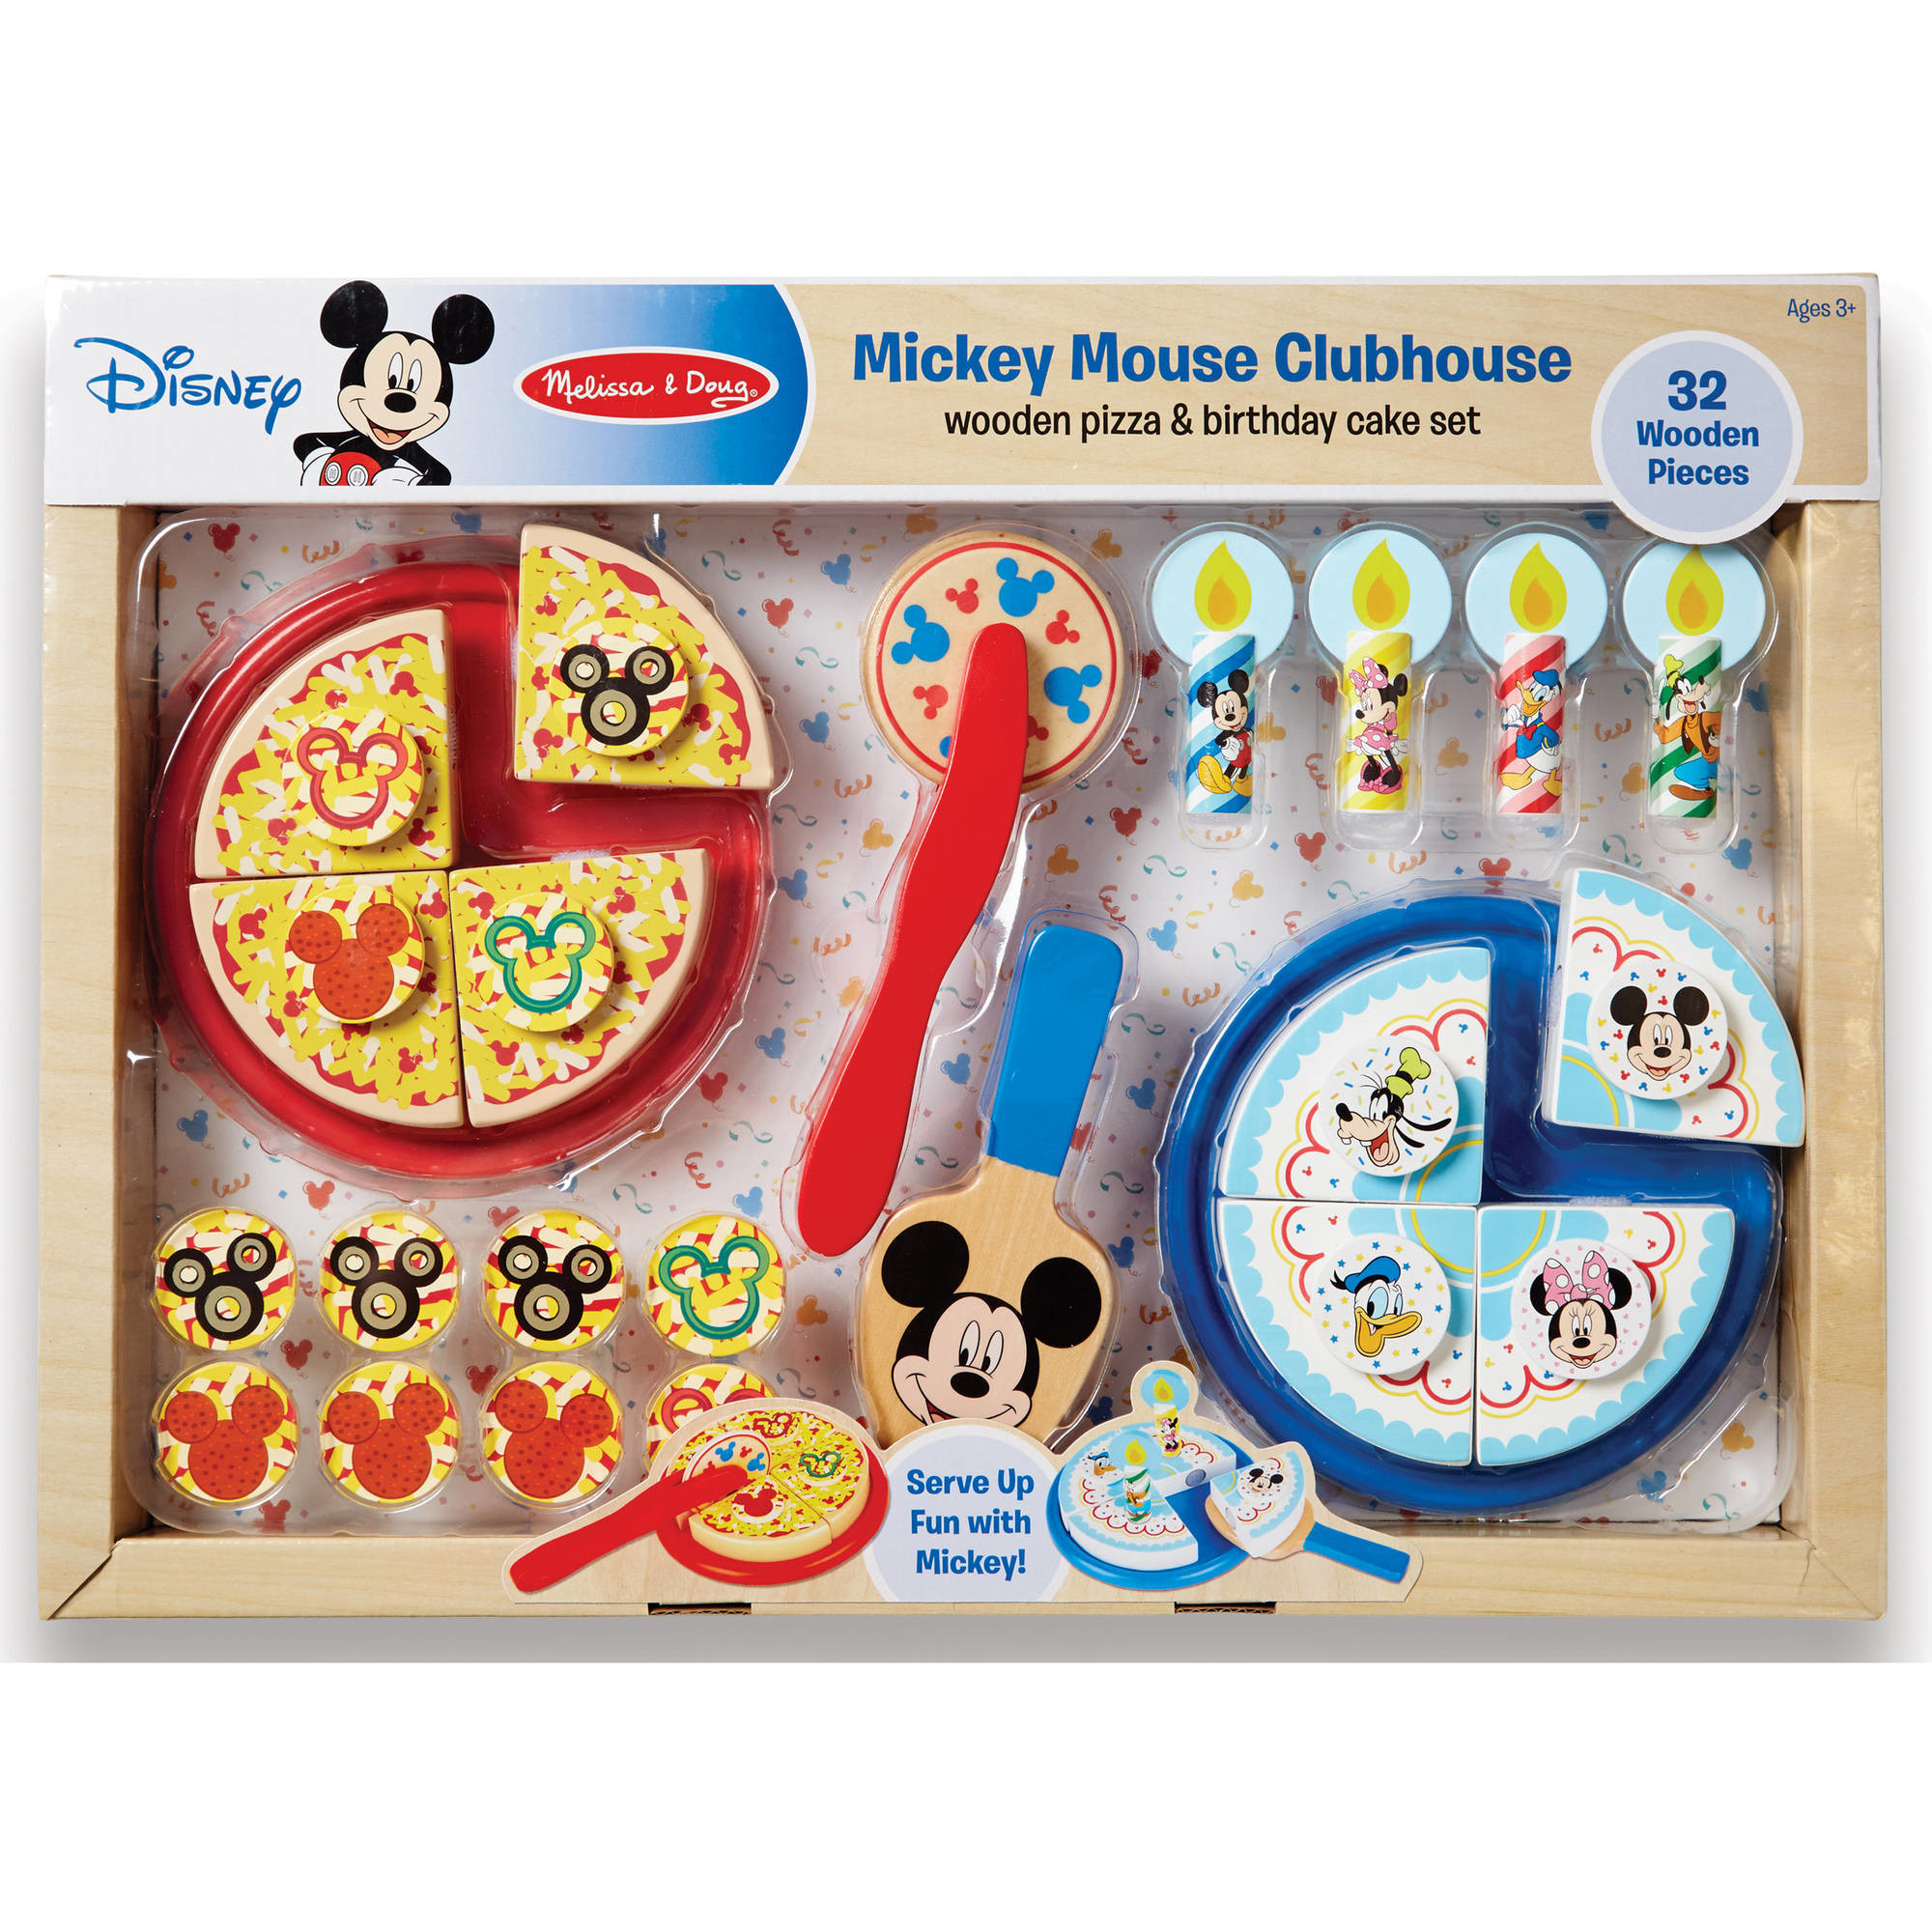 2000x2000 Astounding Mickey Mouse Cake Walmart 17 In Home Pictures With Mickey Mouse  Cake Walmart